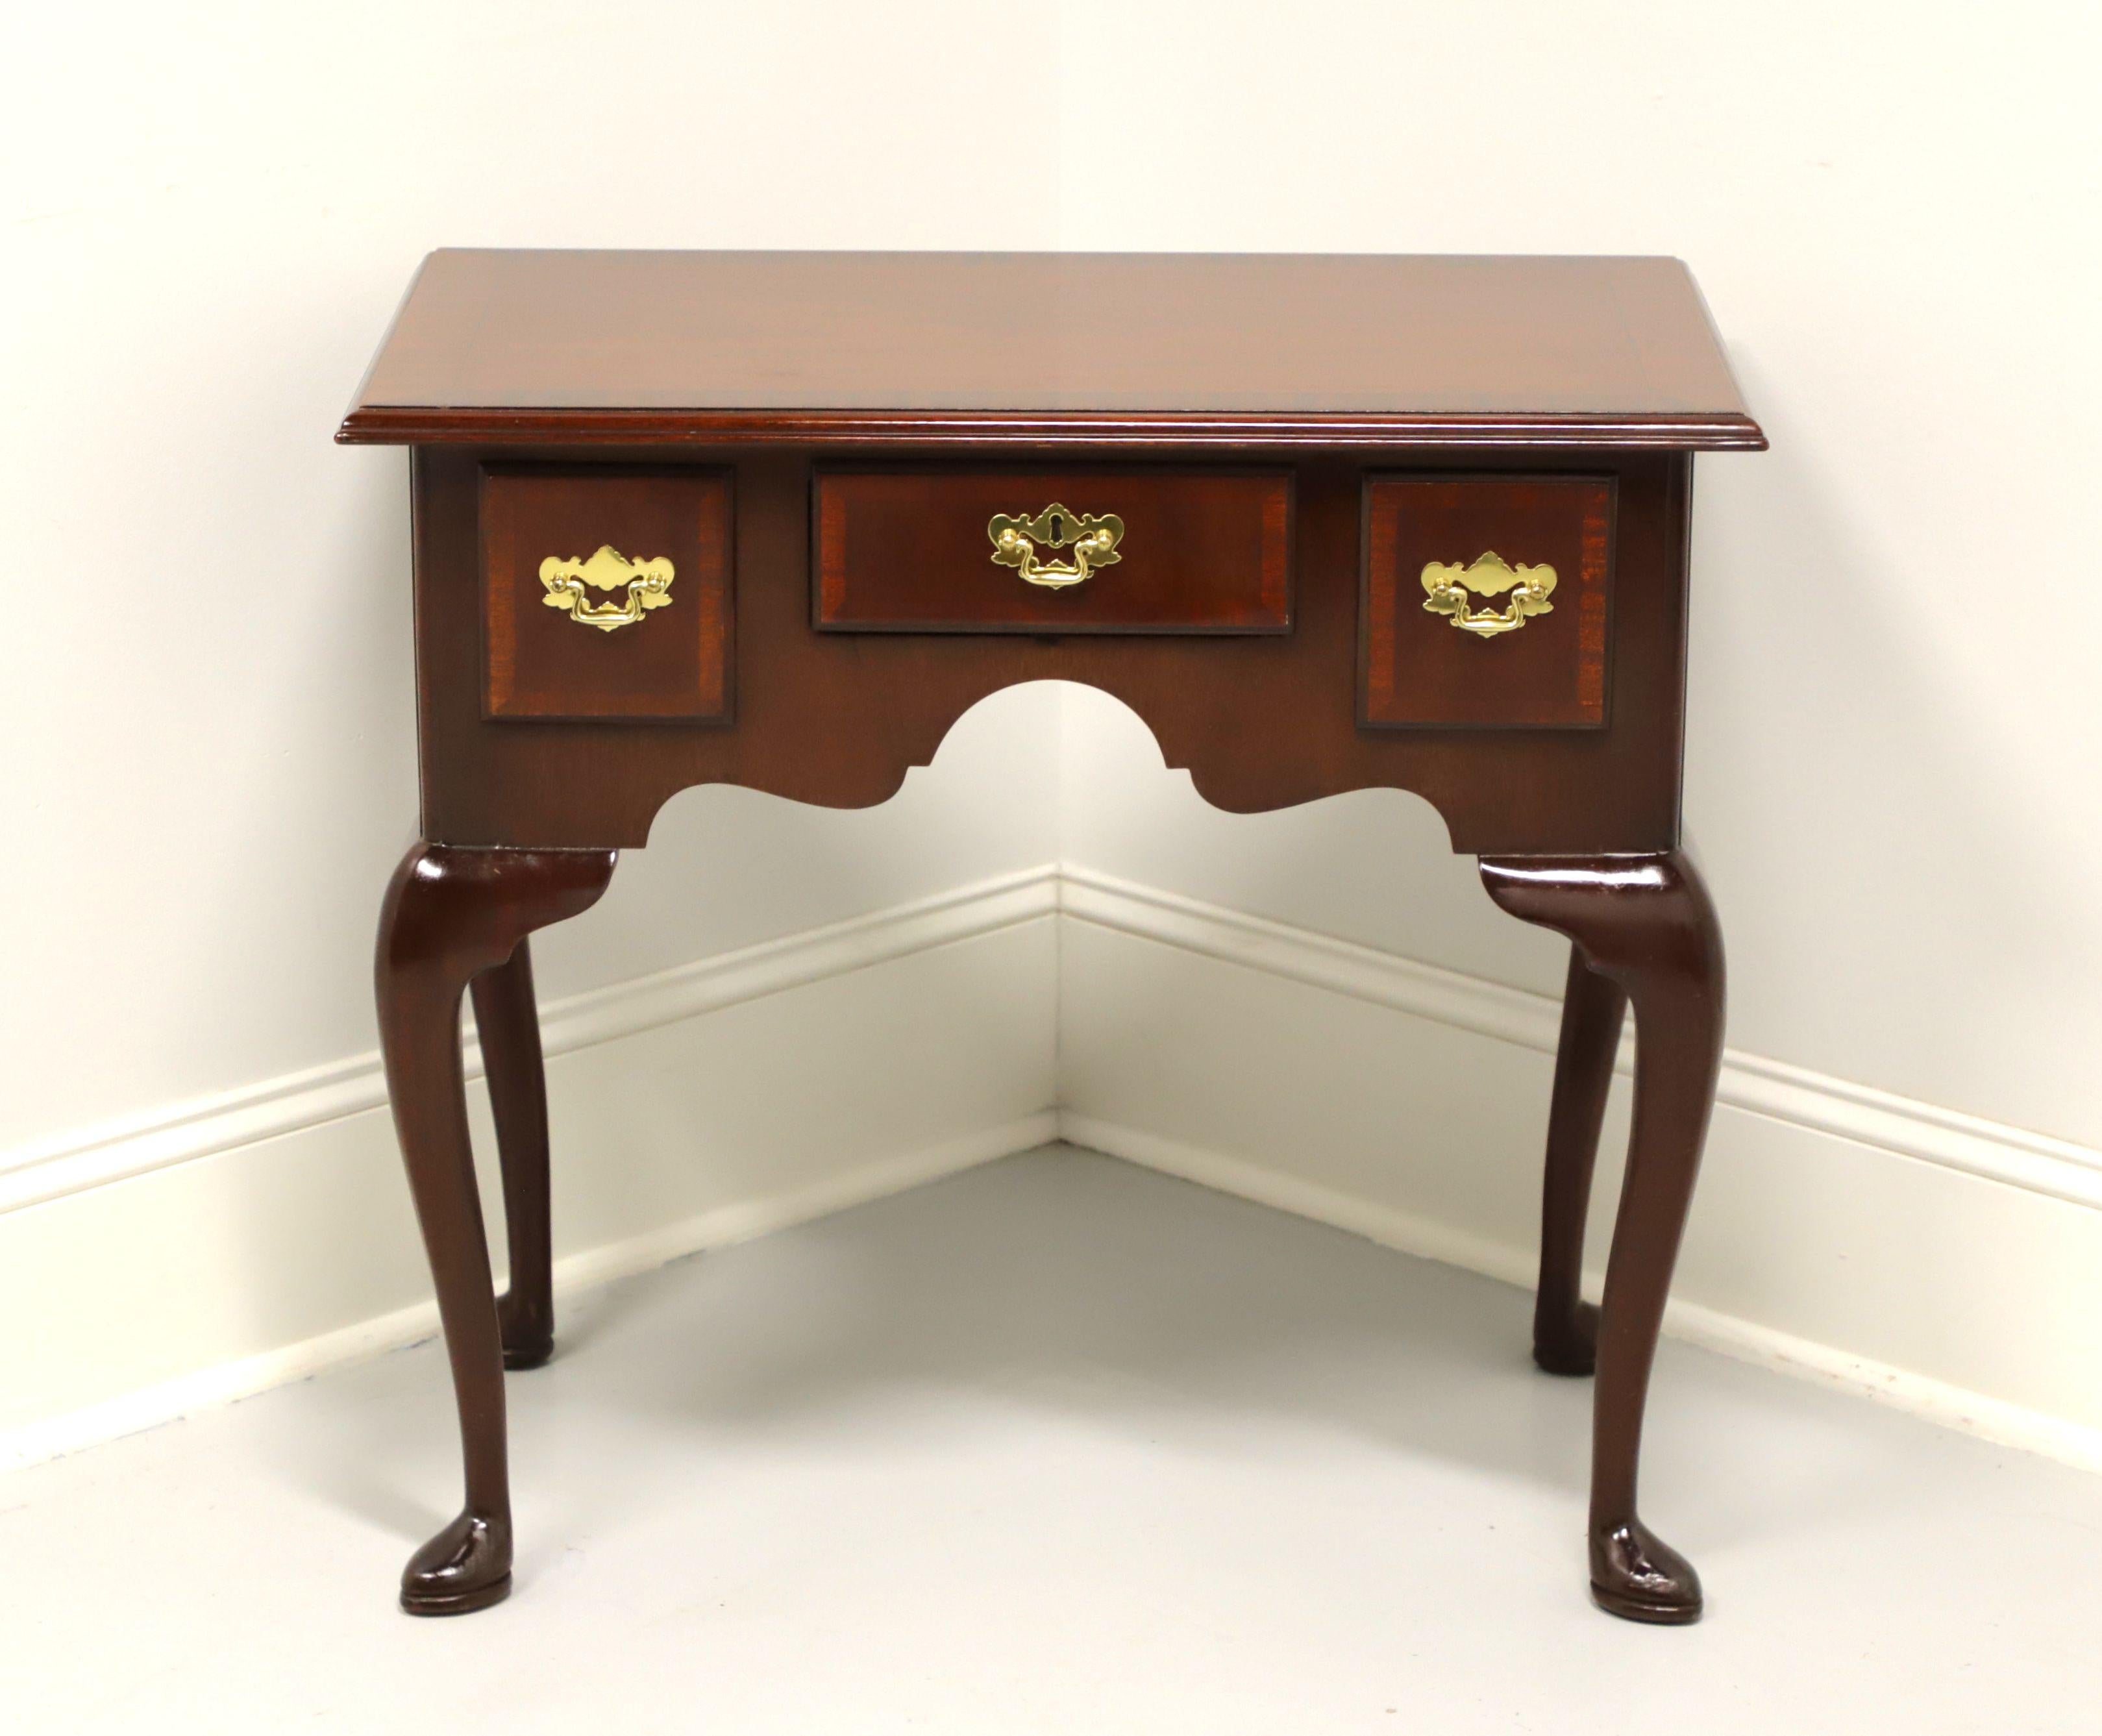 A Queen Anne style side table by Councill. Mahogany with banded top & drawer fronts, brass hardware, carved apron, cabriole legs and pad feet. Features three drawers of dovetail construction, center one having a faux keyhole escutcheon. Made in